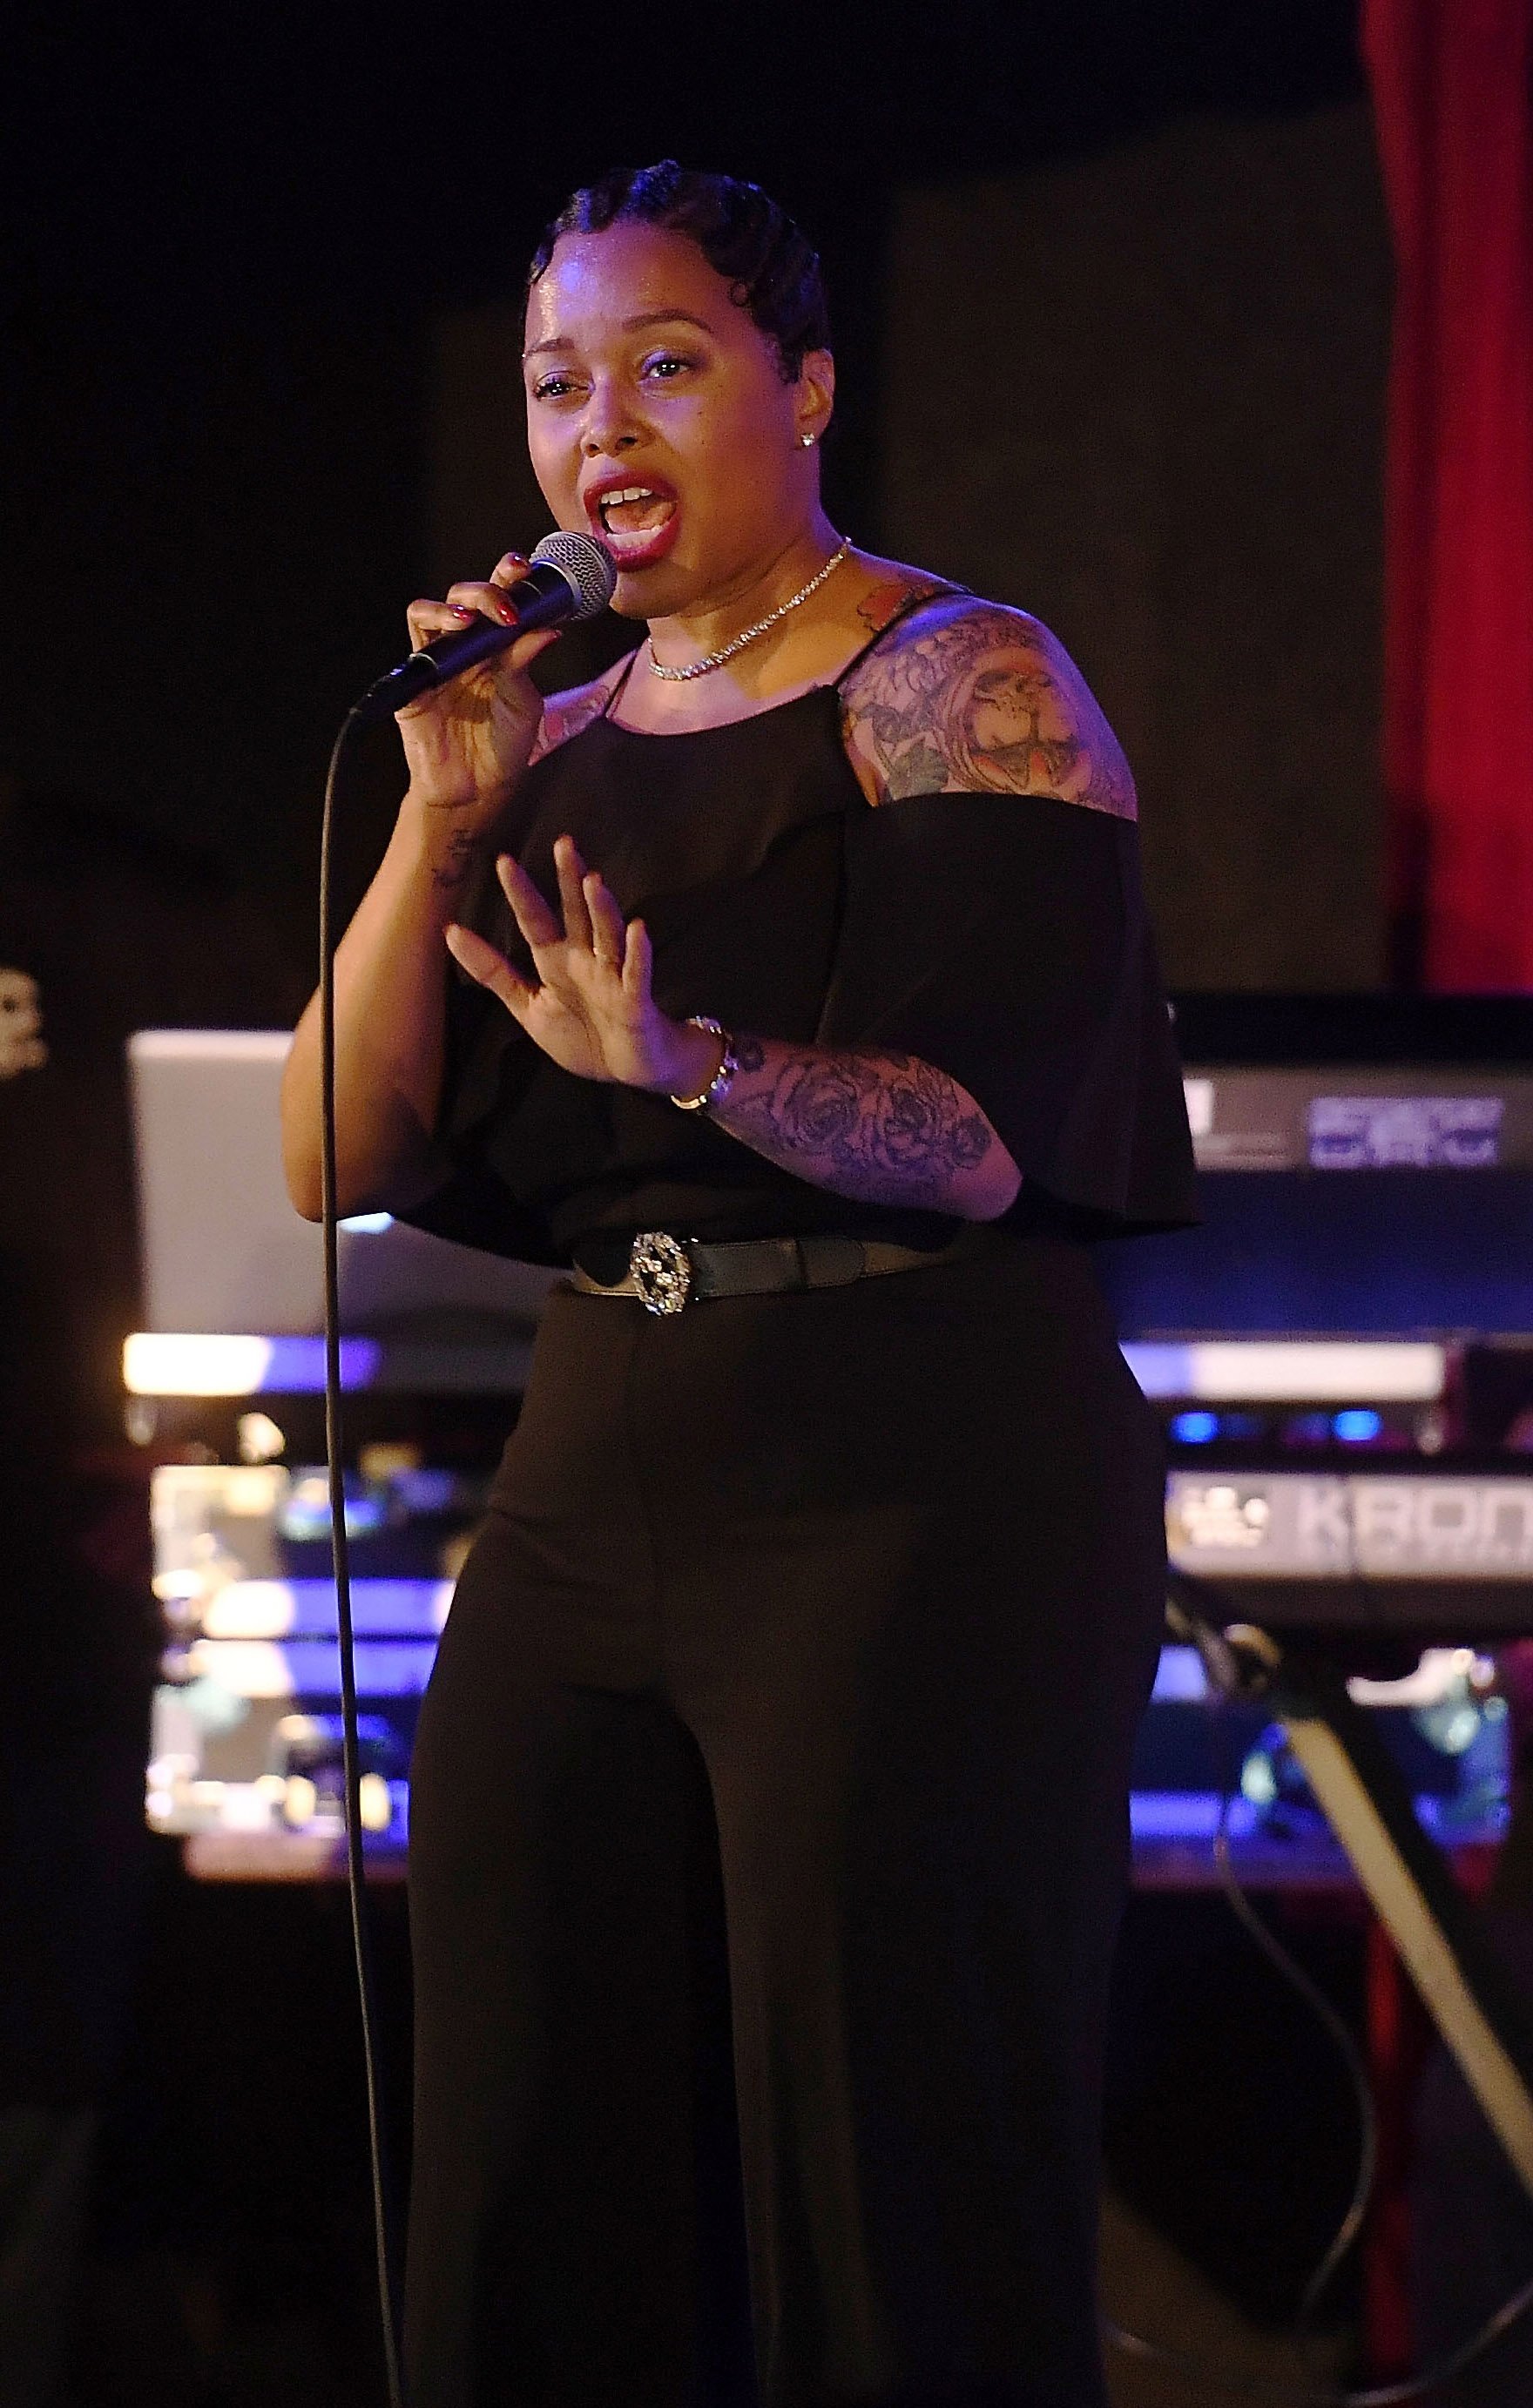 Singer Chrisette Michele performs onstage during Majic 107.5 After Dark at City Winery on February 26, 2018 in Atlanta, Georgia. | Photo: GettyImages/Global Images of Ukraine